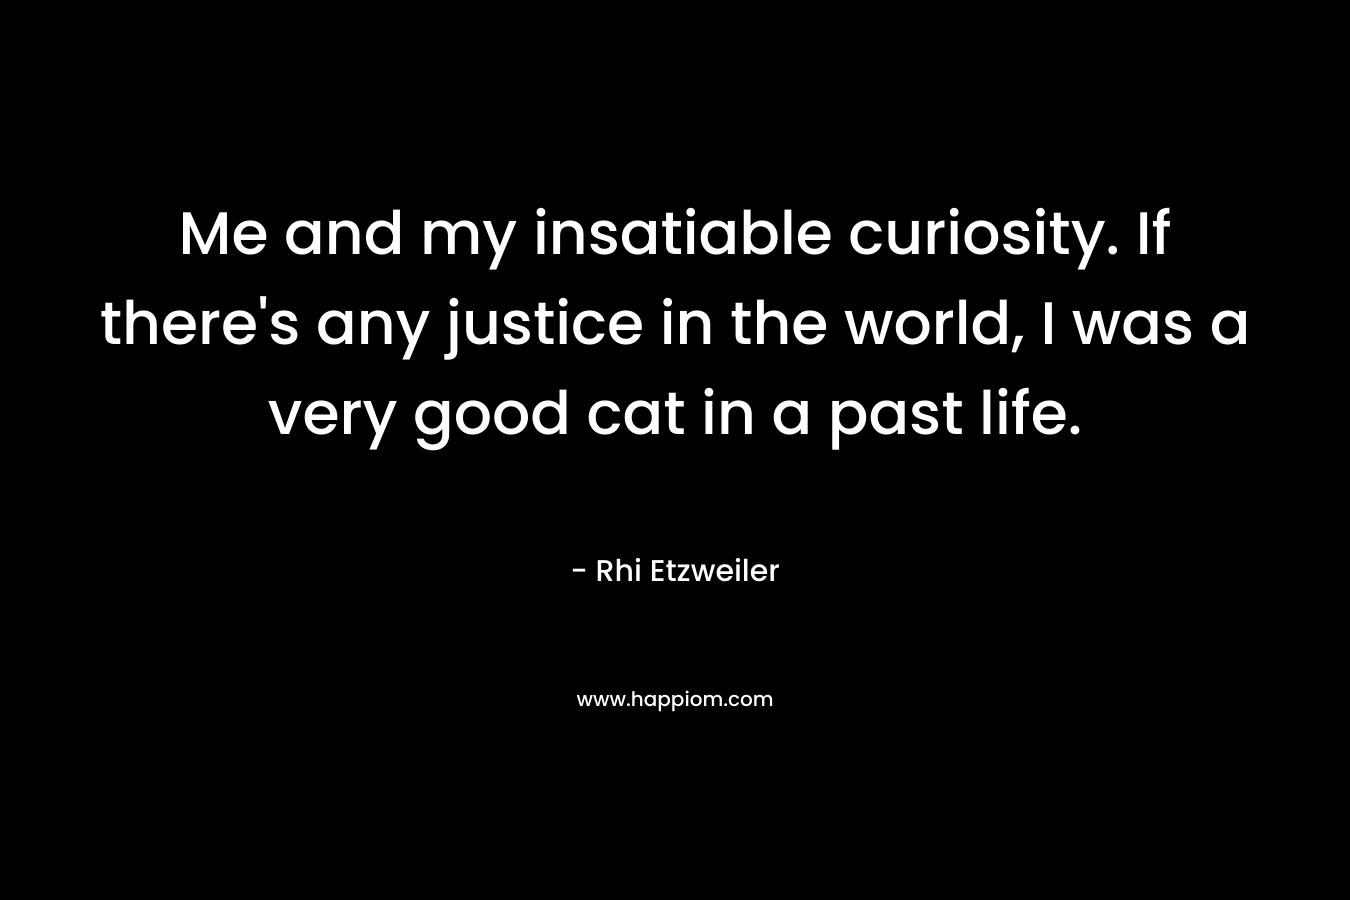 Me and my insatiable curiosity. If there’s any justice in the world, I was a very good cat in a past life. – Rhi Etzweiler